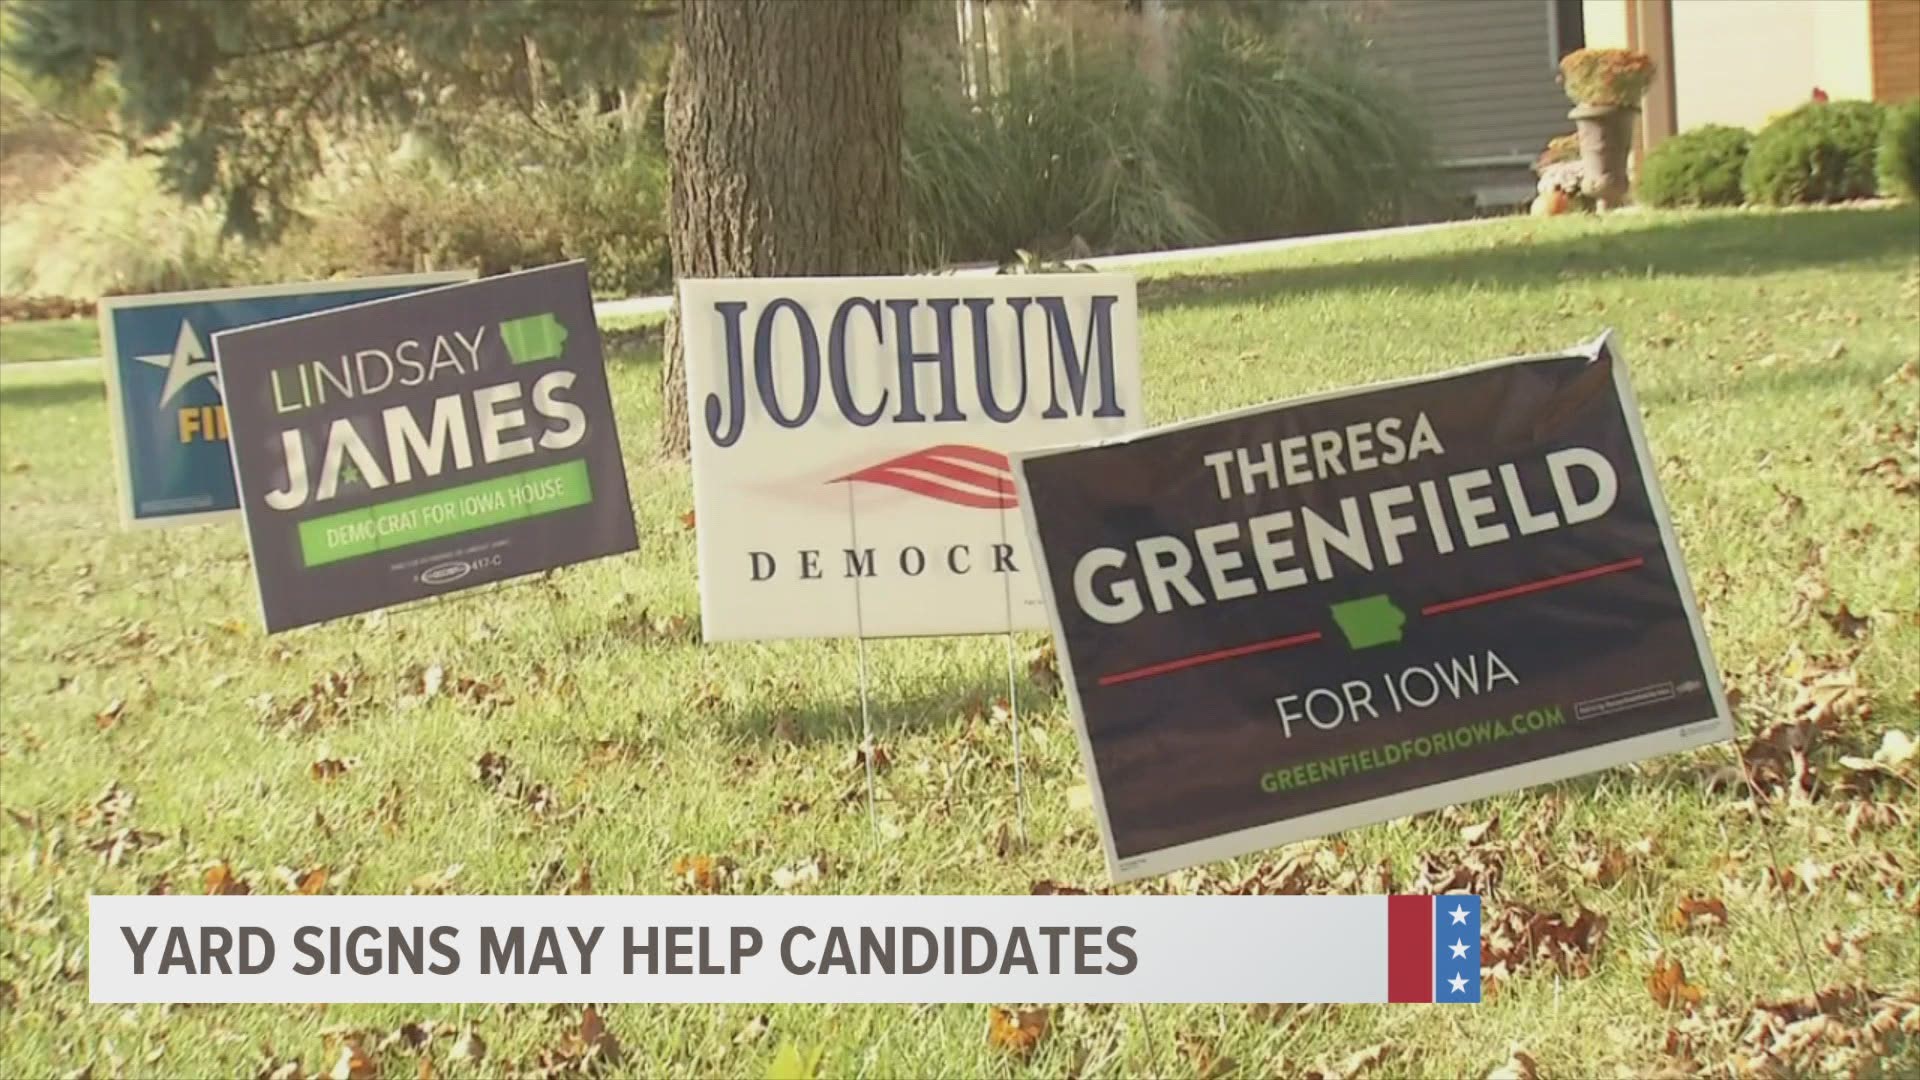 While it doesn't matter much for the presidency, political signs can help earn a candidate a point or two, especially among local candidates.